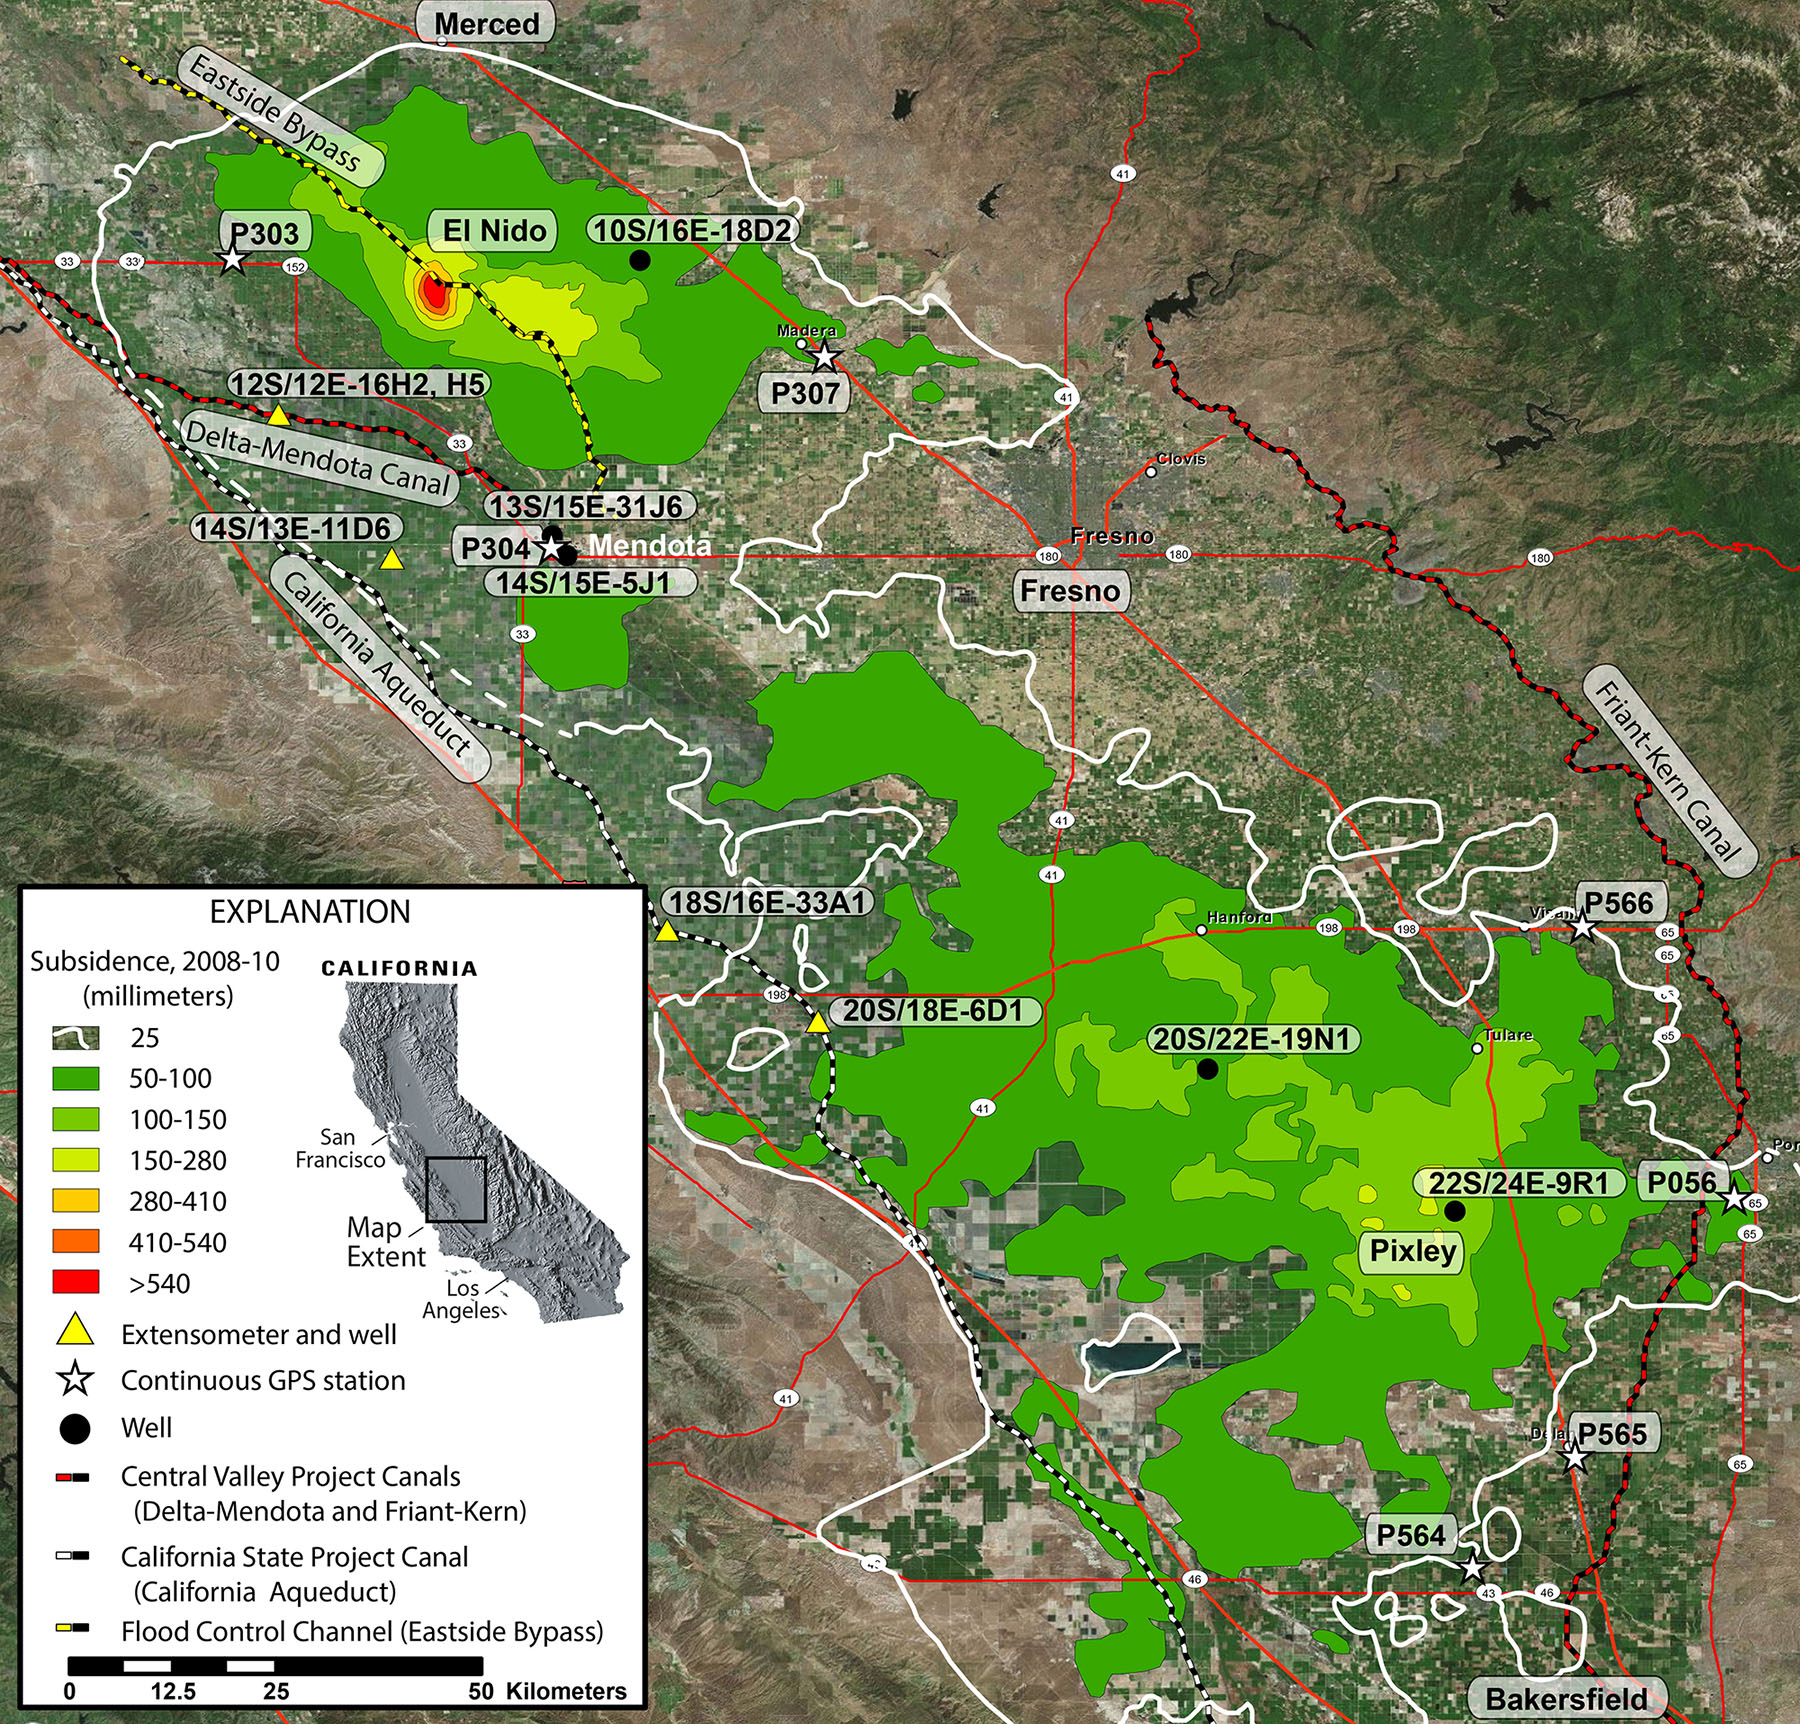 Subsidence contours derived from interferograms generated from the Advanced Land Observing Satellite (ALOS) and the Environmental Satellite (ENVISAT) showing subsidence in the San Joaquin Valley, California, during 2008–2010. North is oriented toward the top of the image.